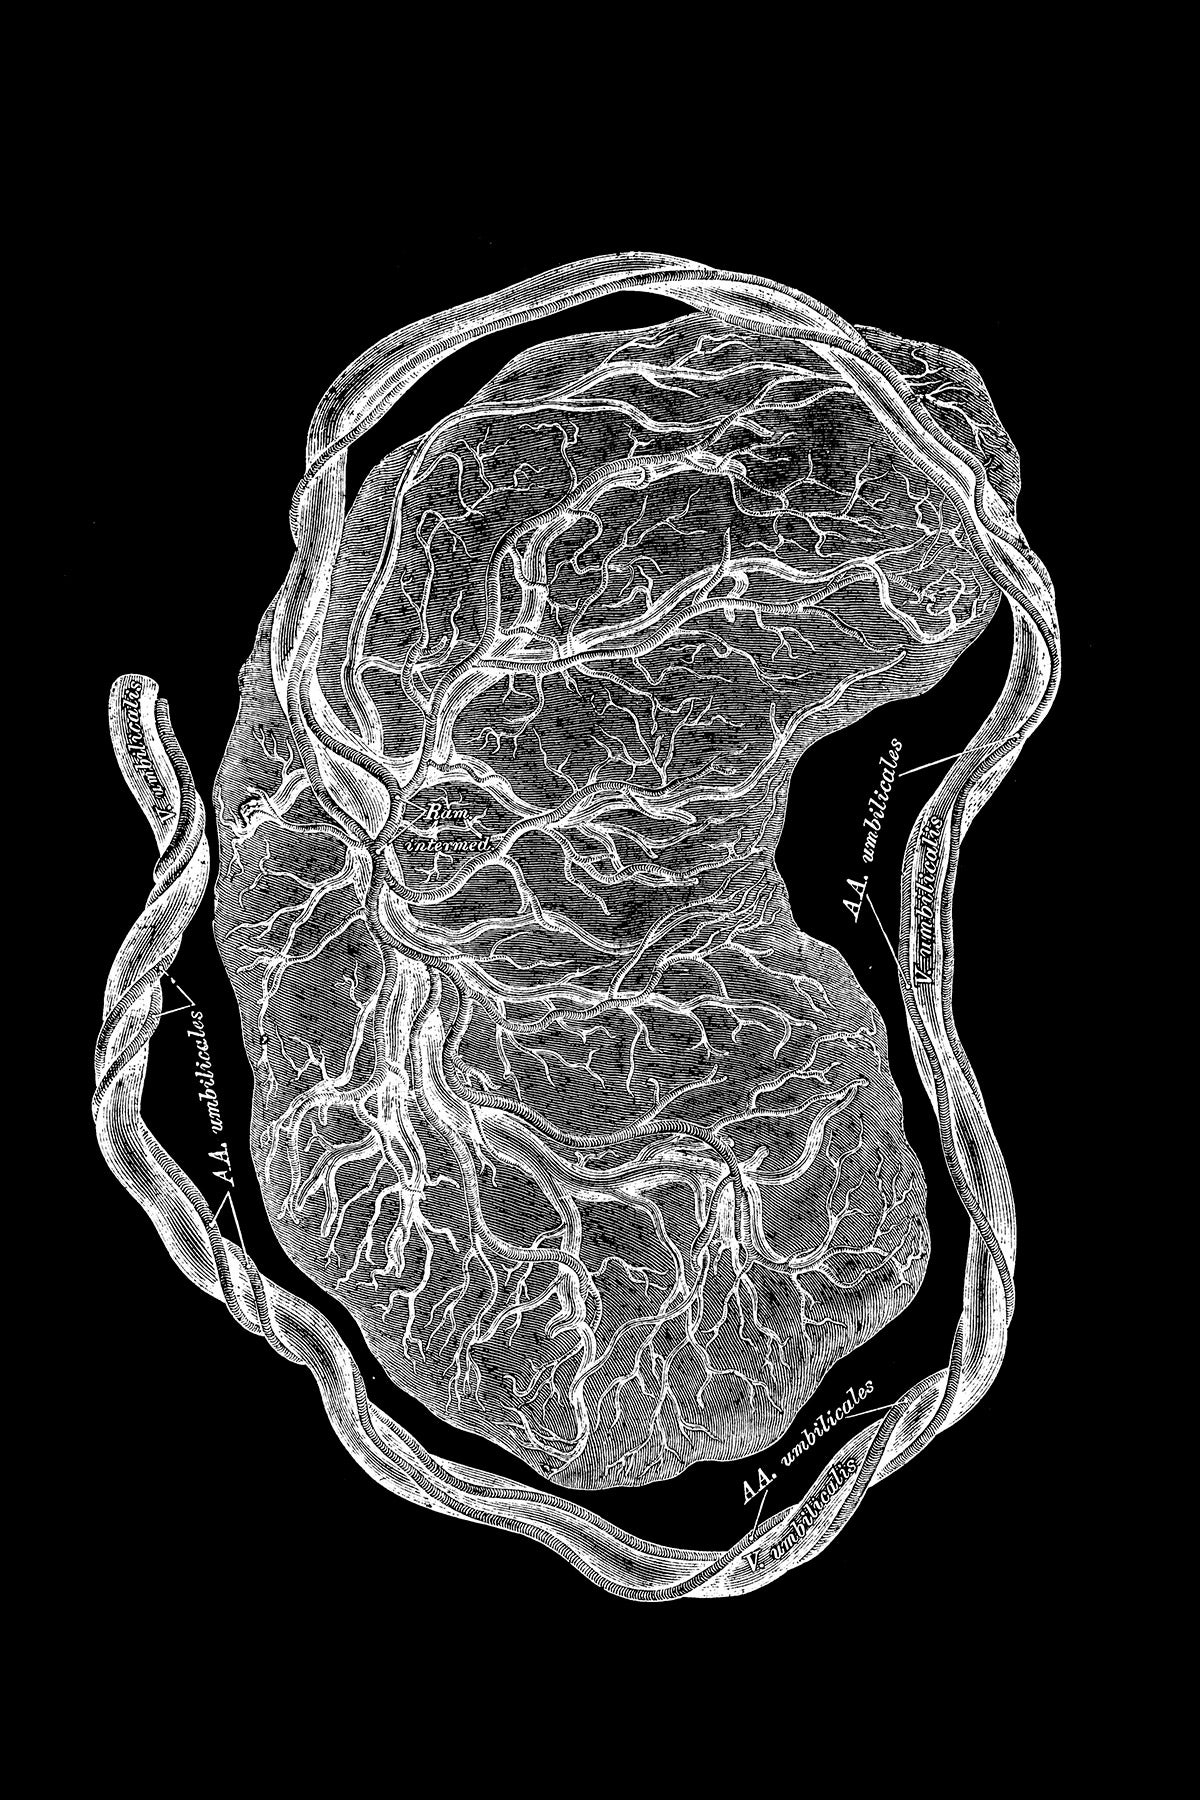 A black-and-white illustration of a placenta.